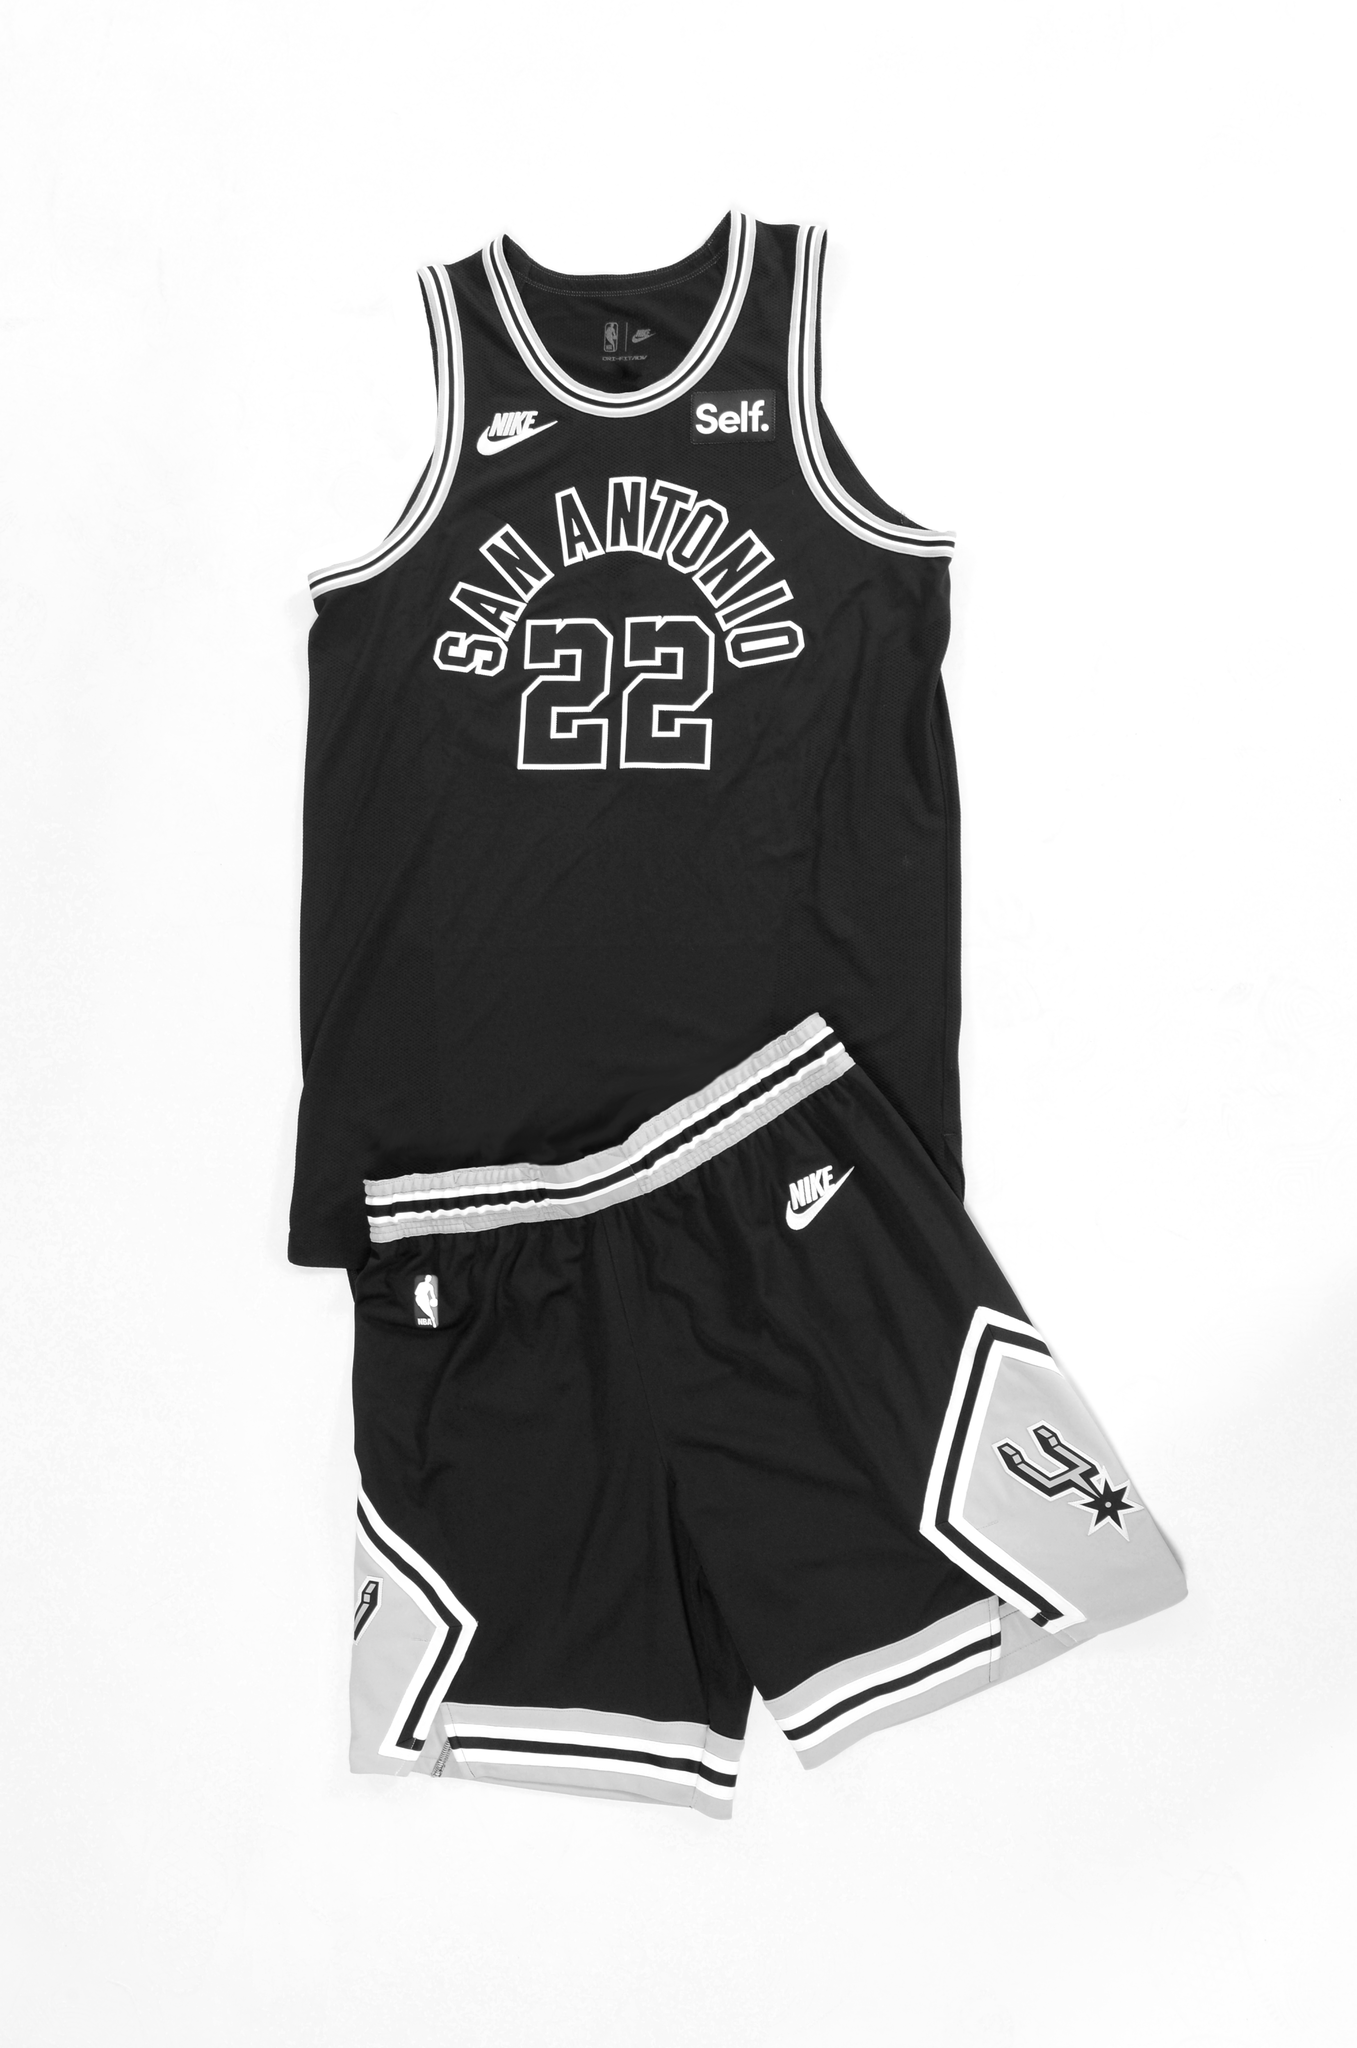 SPURS UNVEIL CLASSIC EDITION UNIFORMS FOR THEIR 50TH ANNIVERSARY SEASON